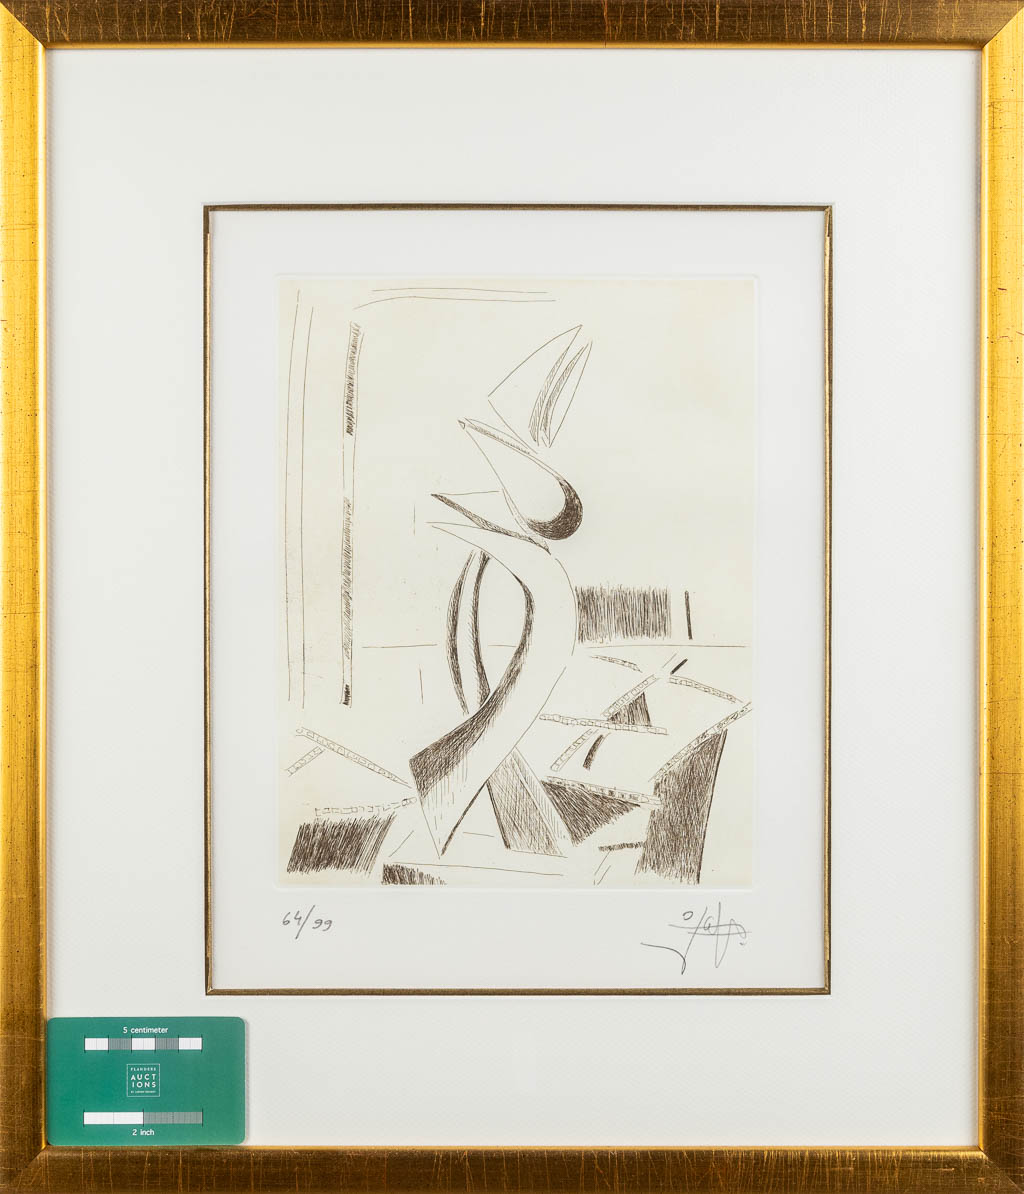 Pablo ATCHUGARRY (1954) 'Designs for a sculpture' Two lithographs. (W:26 x H:33 cm) - Image 2 of 15